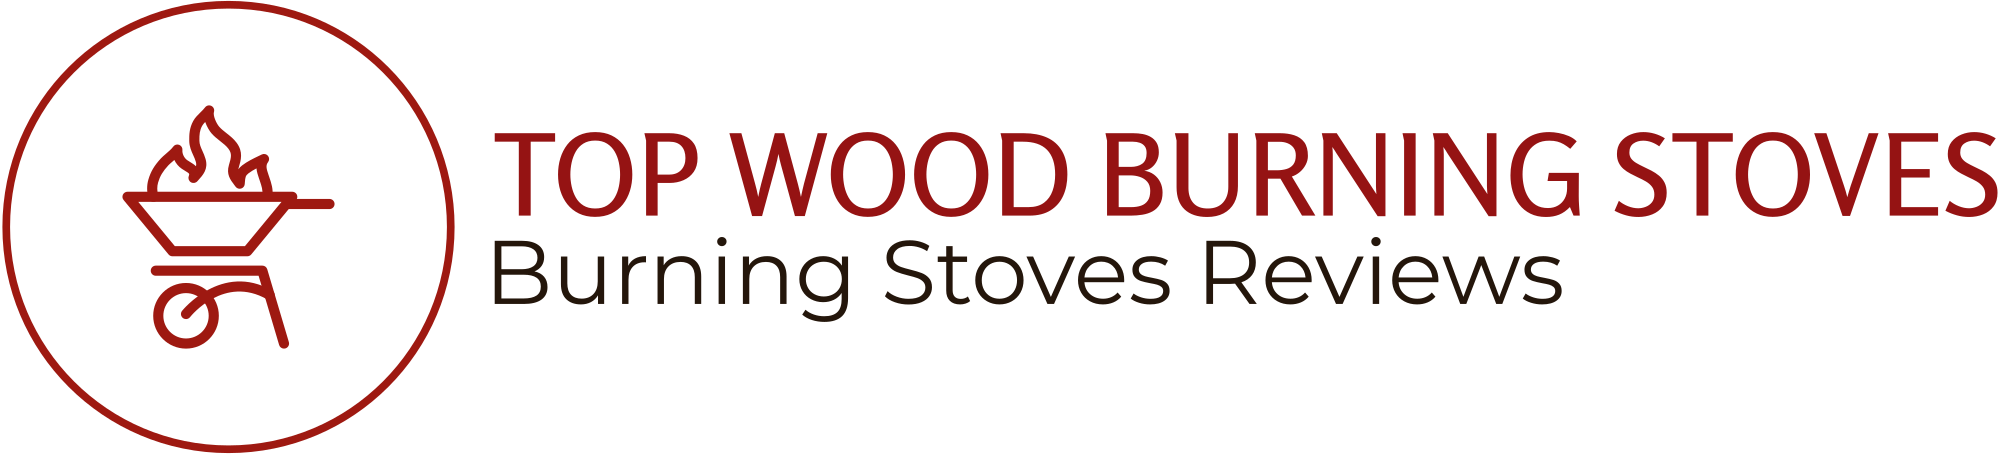 Top Wood Burning Stoves